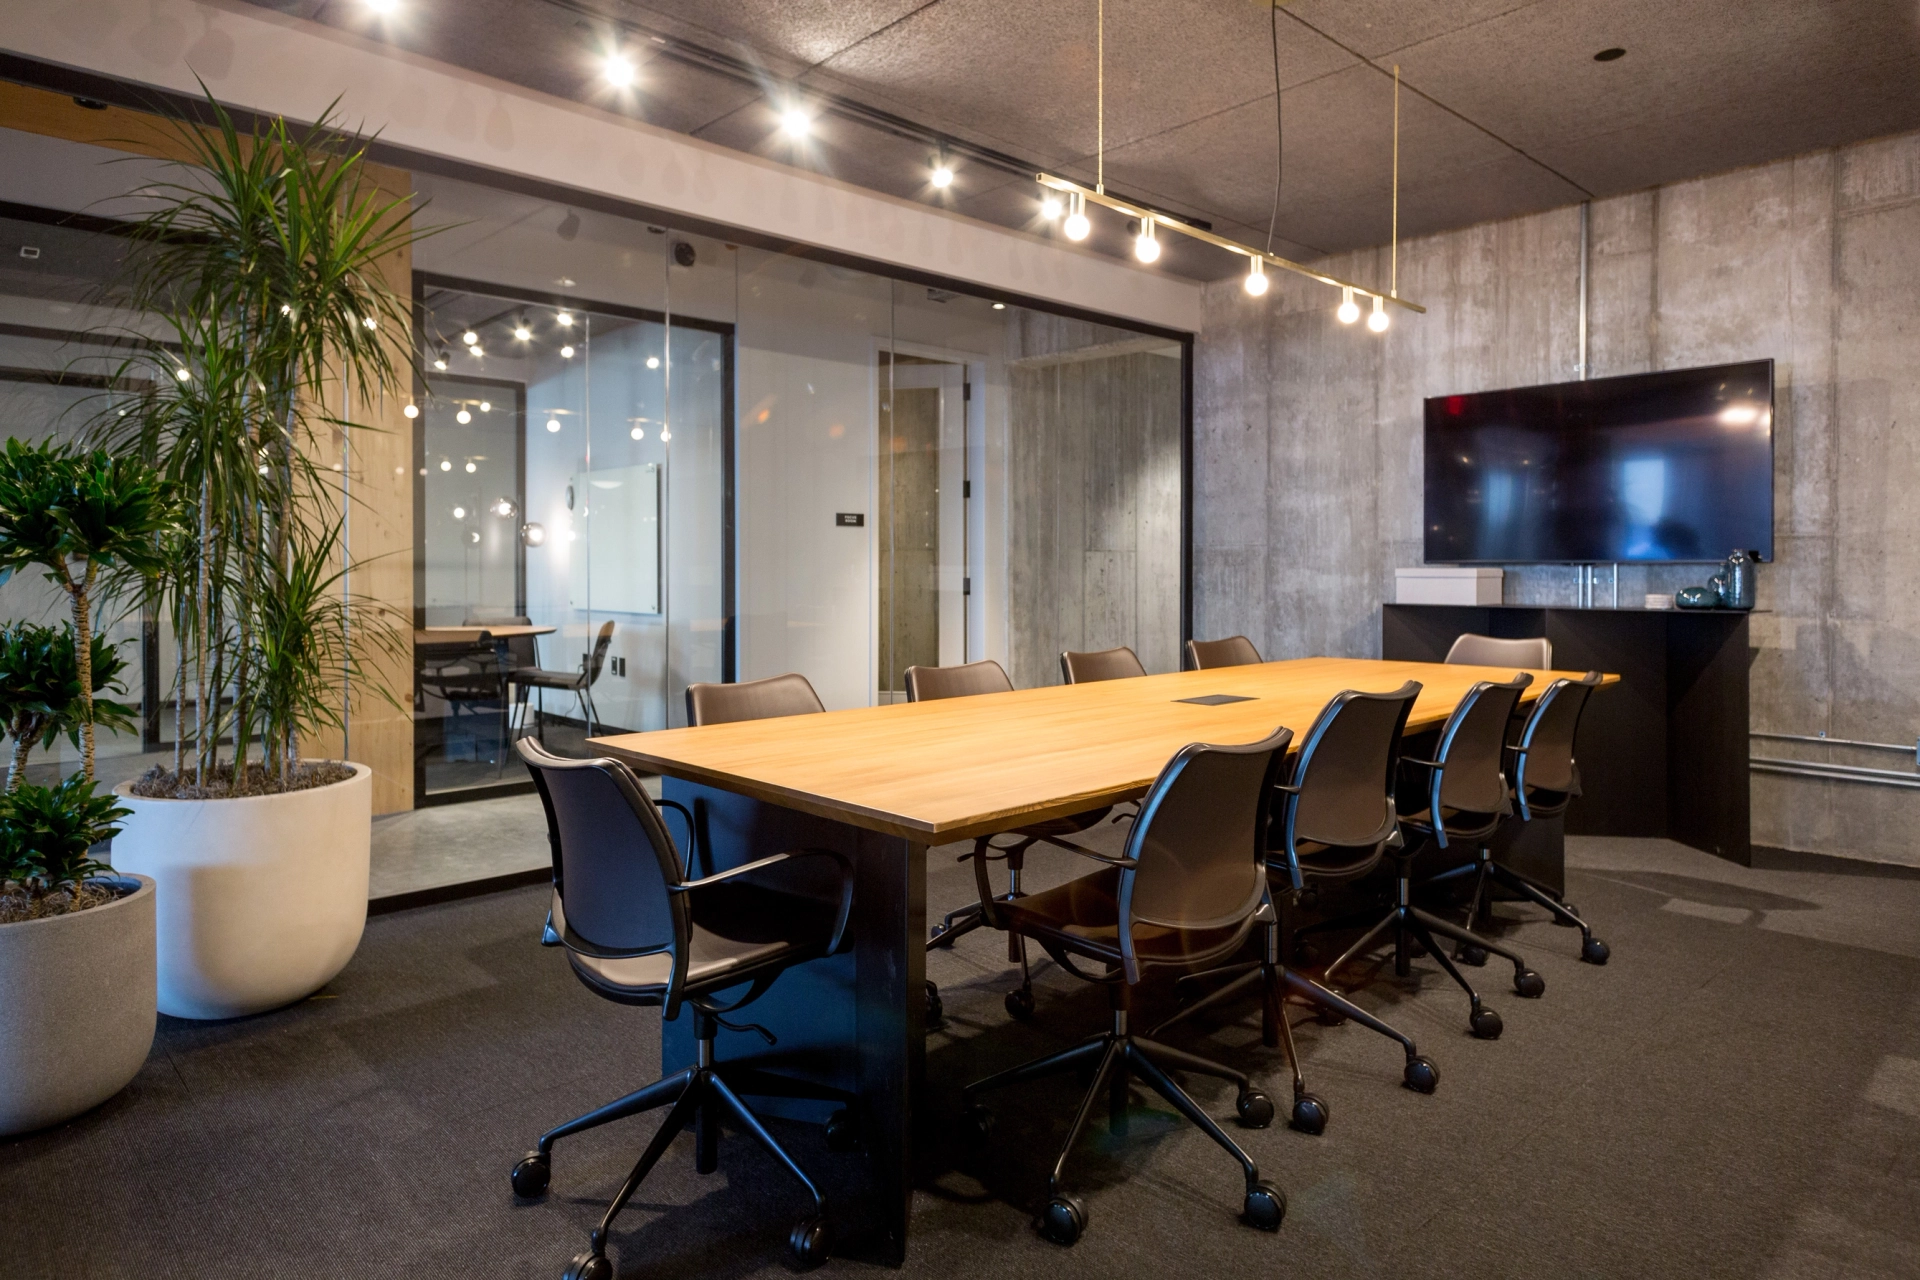 a spacious meeting room in Minneapolis with a large table and chairs for collaborative workspace.